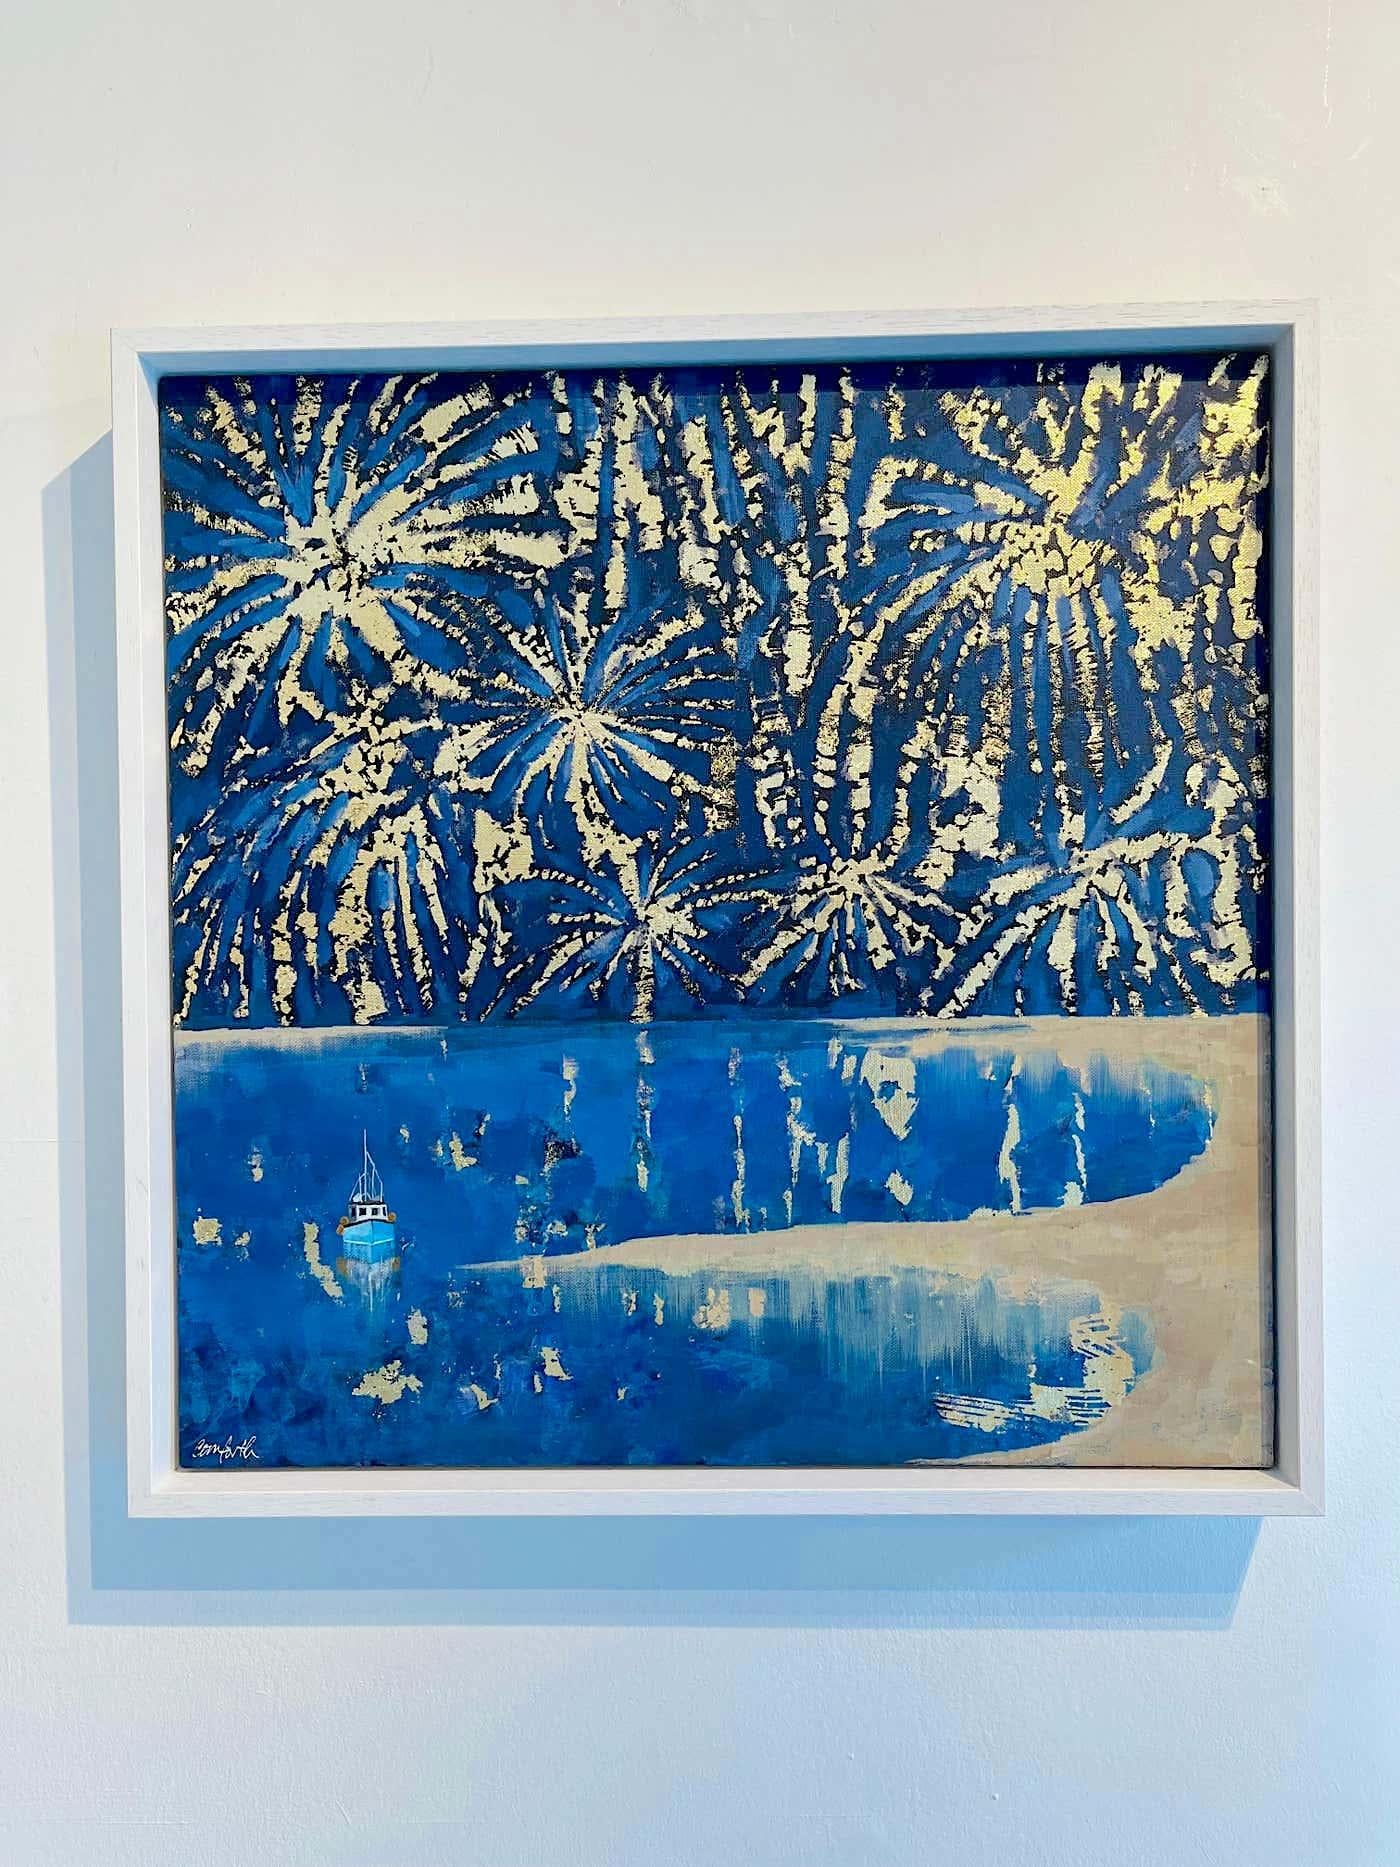 Winter Fireworks-ORIGINAL IMPRESSIONISM Seascape oil painting-contemporary art - Painting by Lenny Cornforth